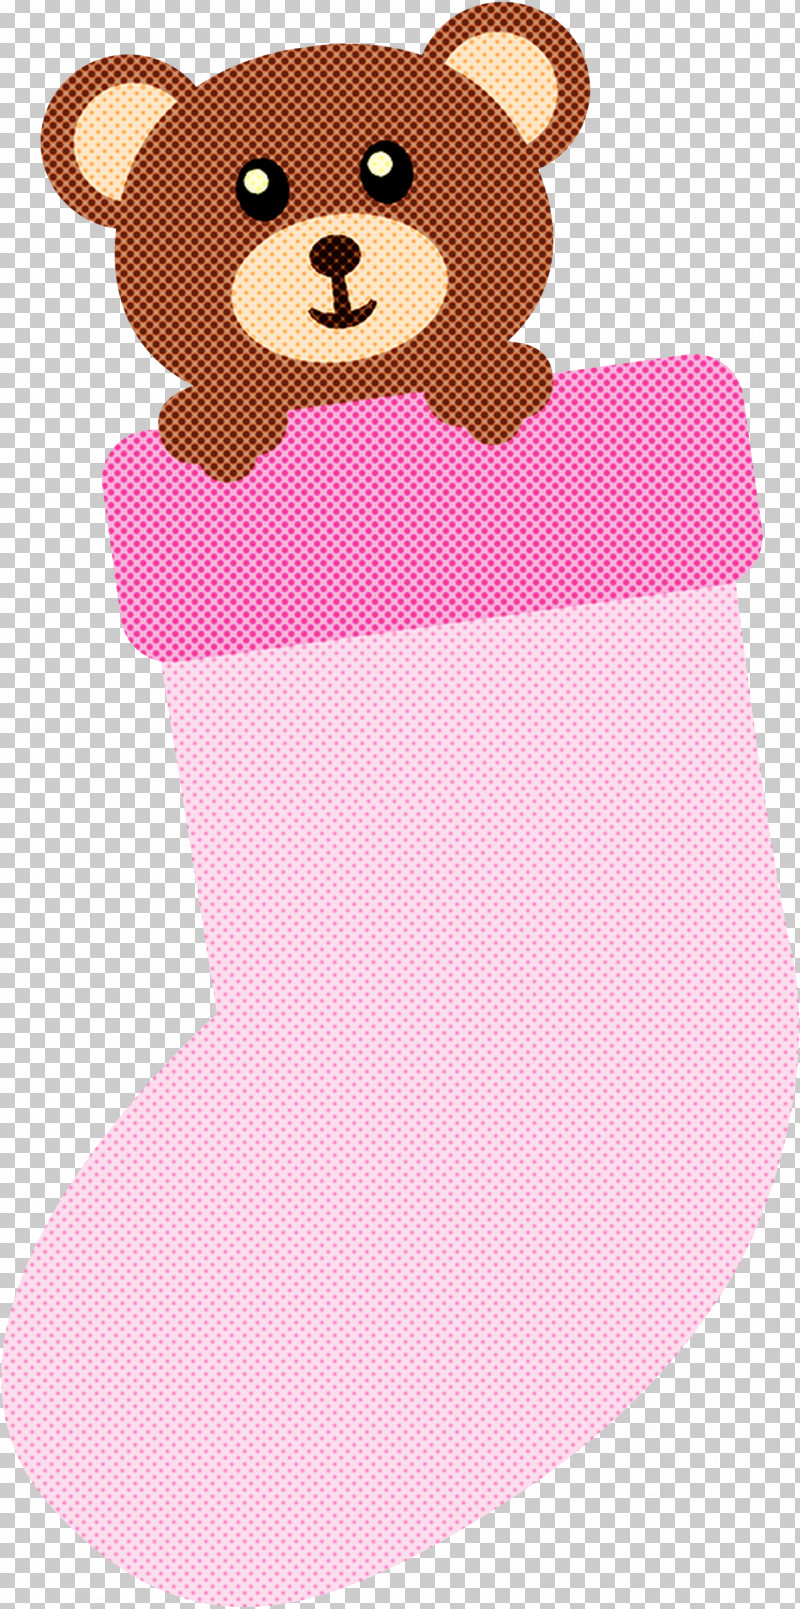 Teddy Bear PNG, Clipart, Cartoon, Pink, Teddy Bear Free PNG Download